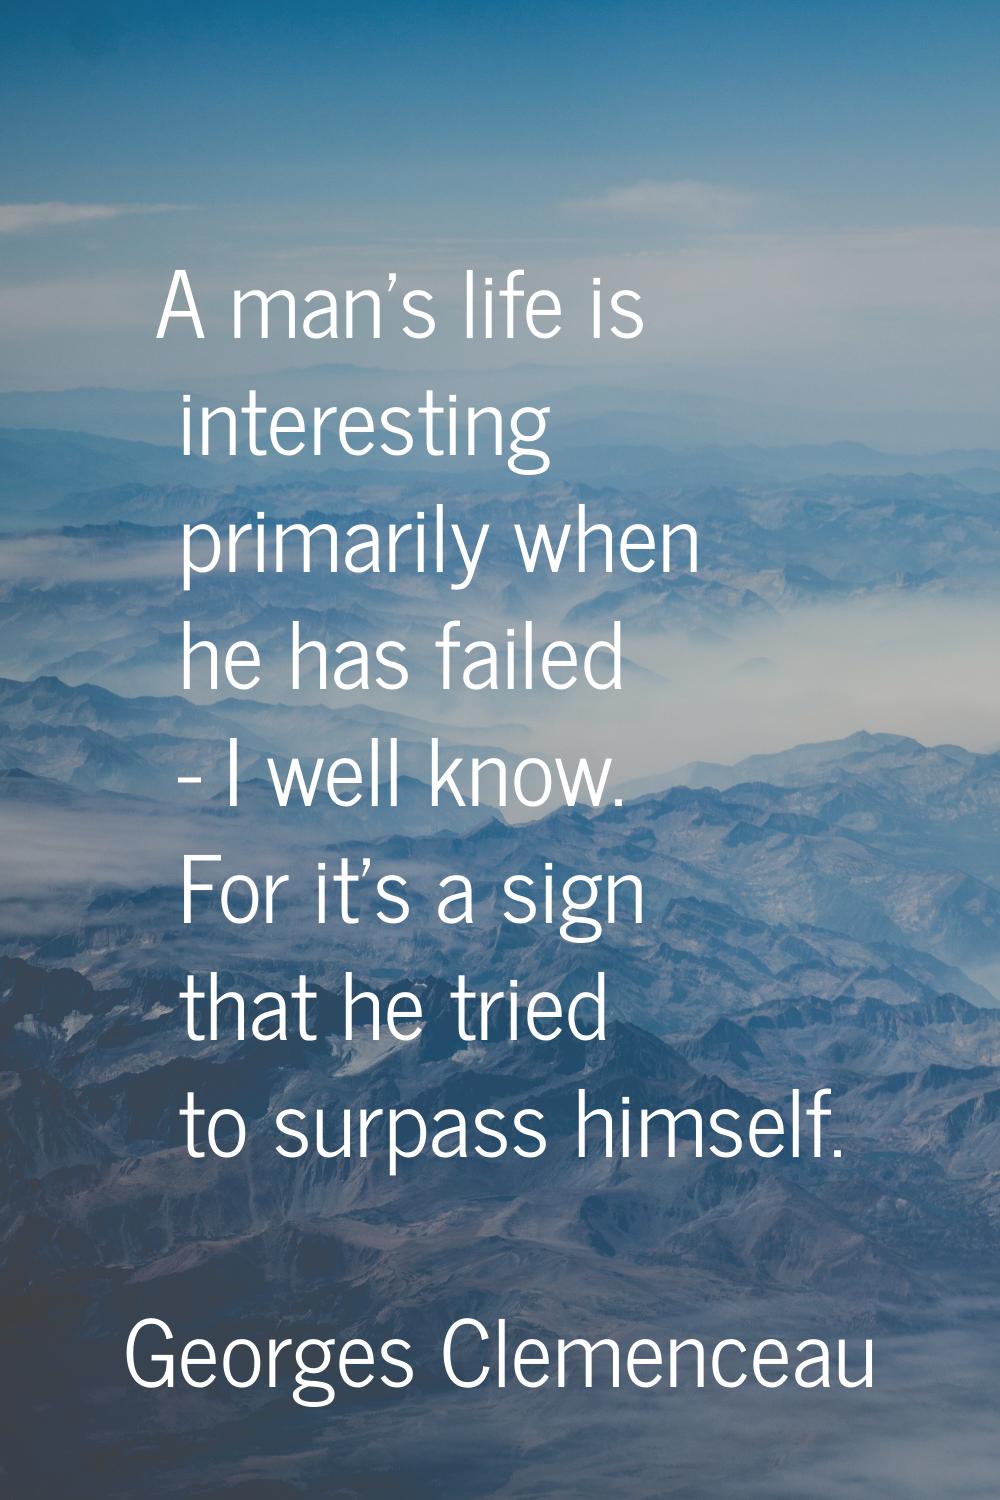 A man's life is interesting primarily when he has failed - I well know. For it's a sign that he tri